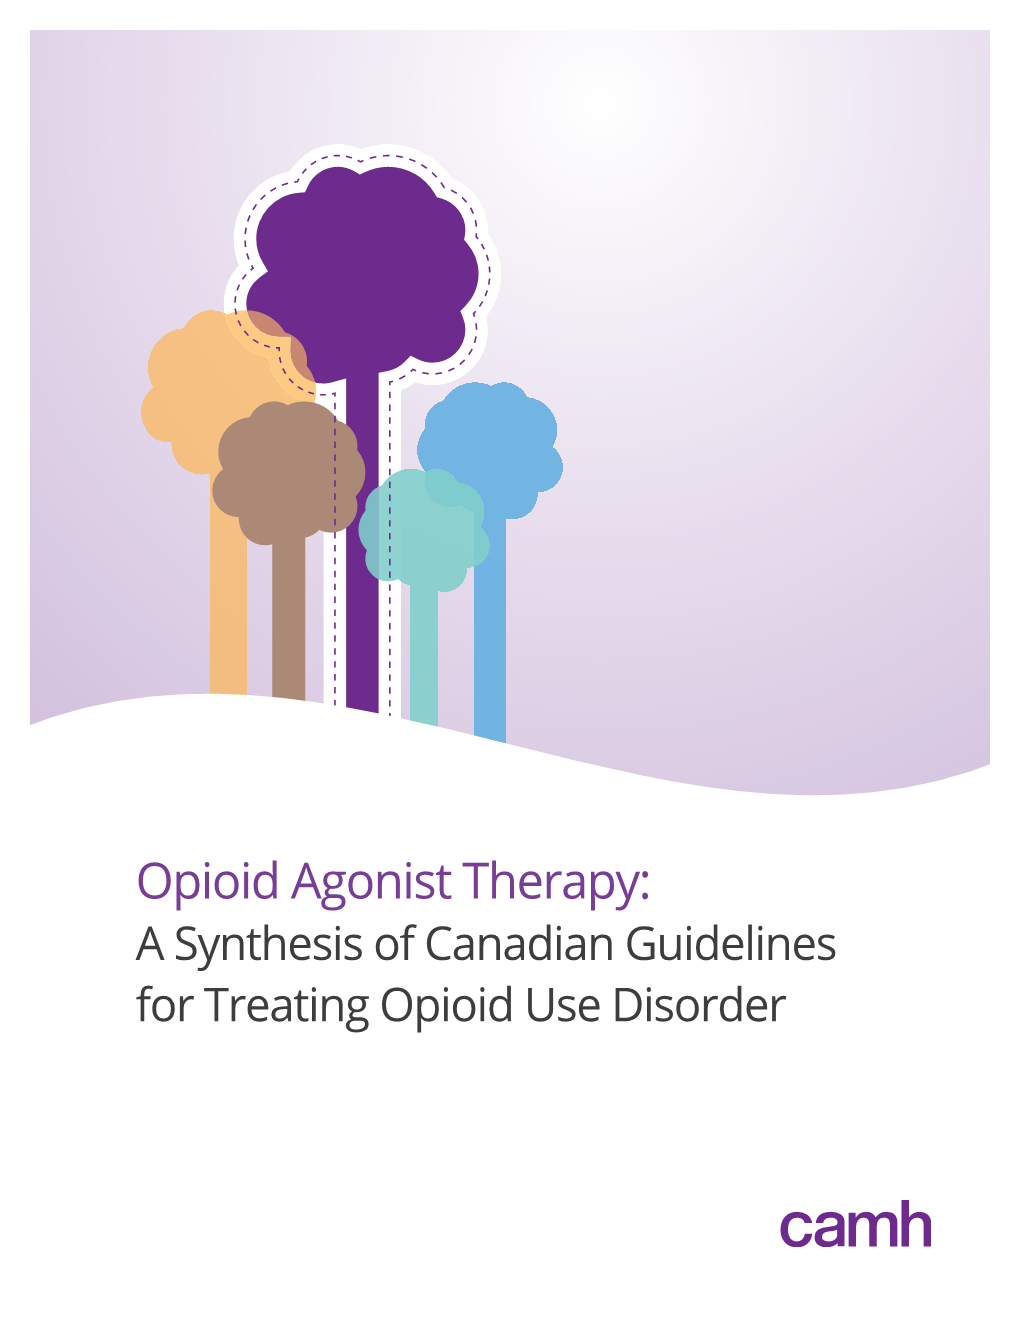 Opioid Agonist Therapy: a Synthesis of Canadian Guidelines for Treating Opioid Use Disorder Centre for Addiction and Mental Health